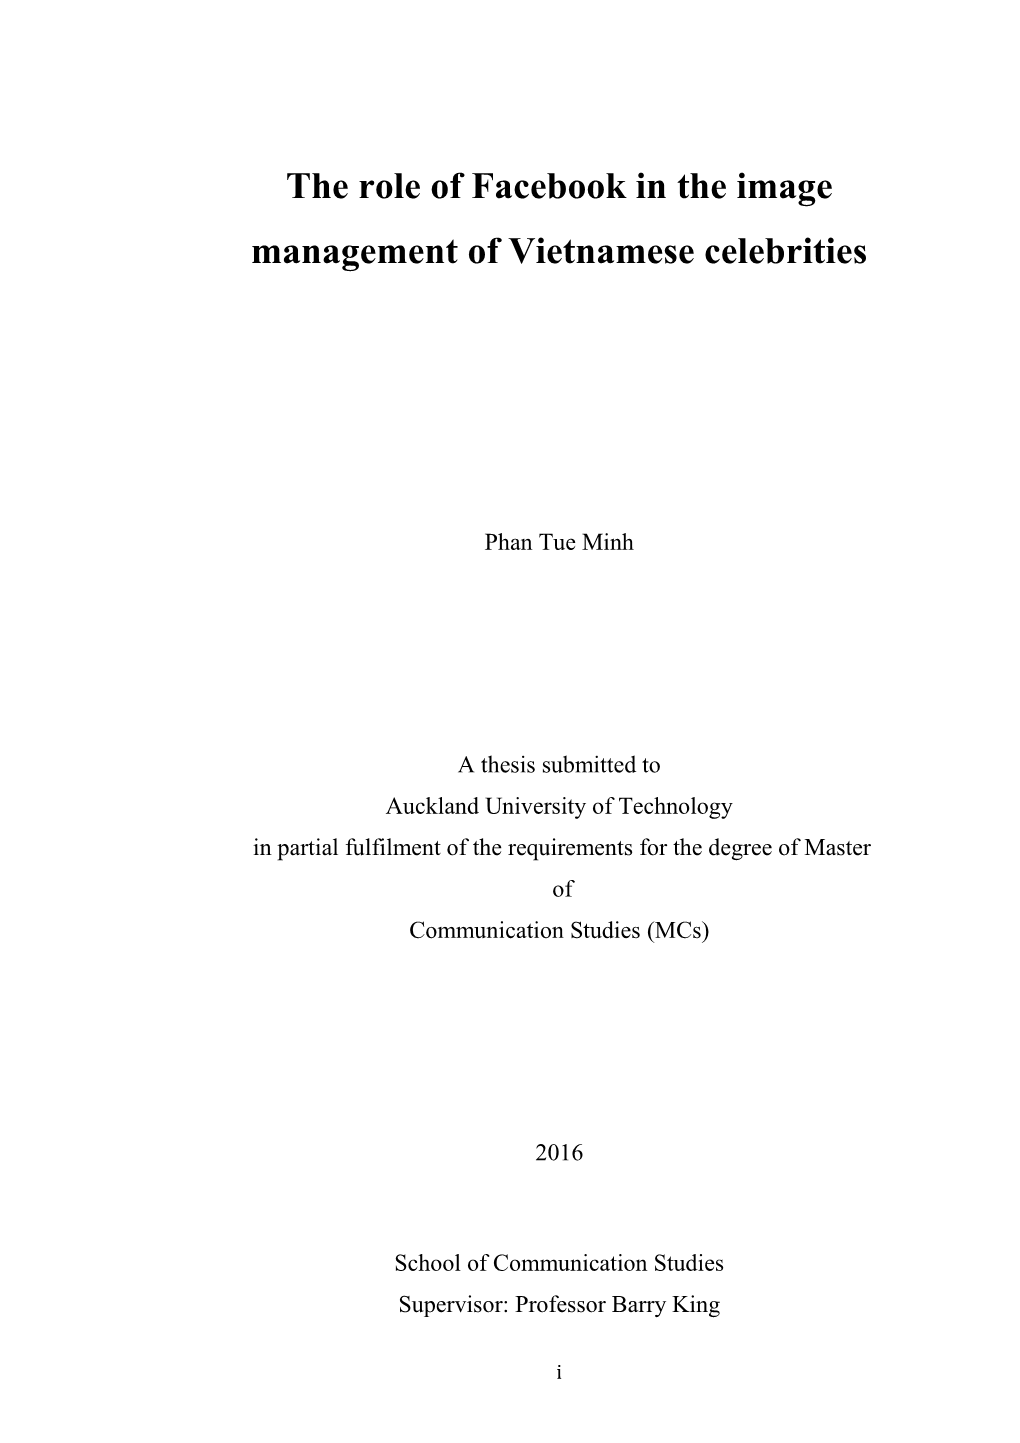 The Role of Facebook in the Image Management of Vietnamese Celebrities